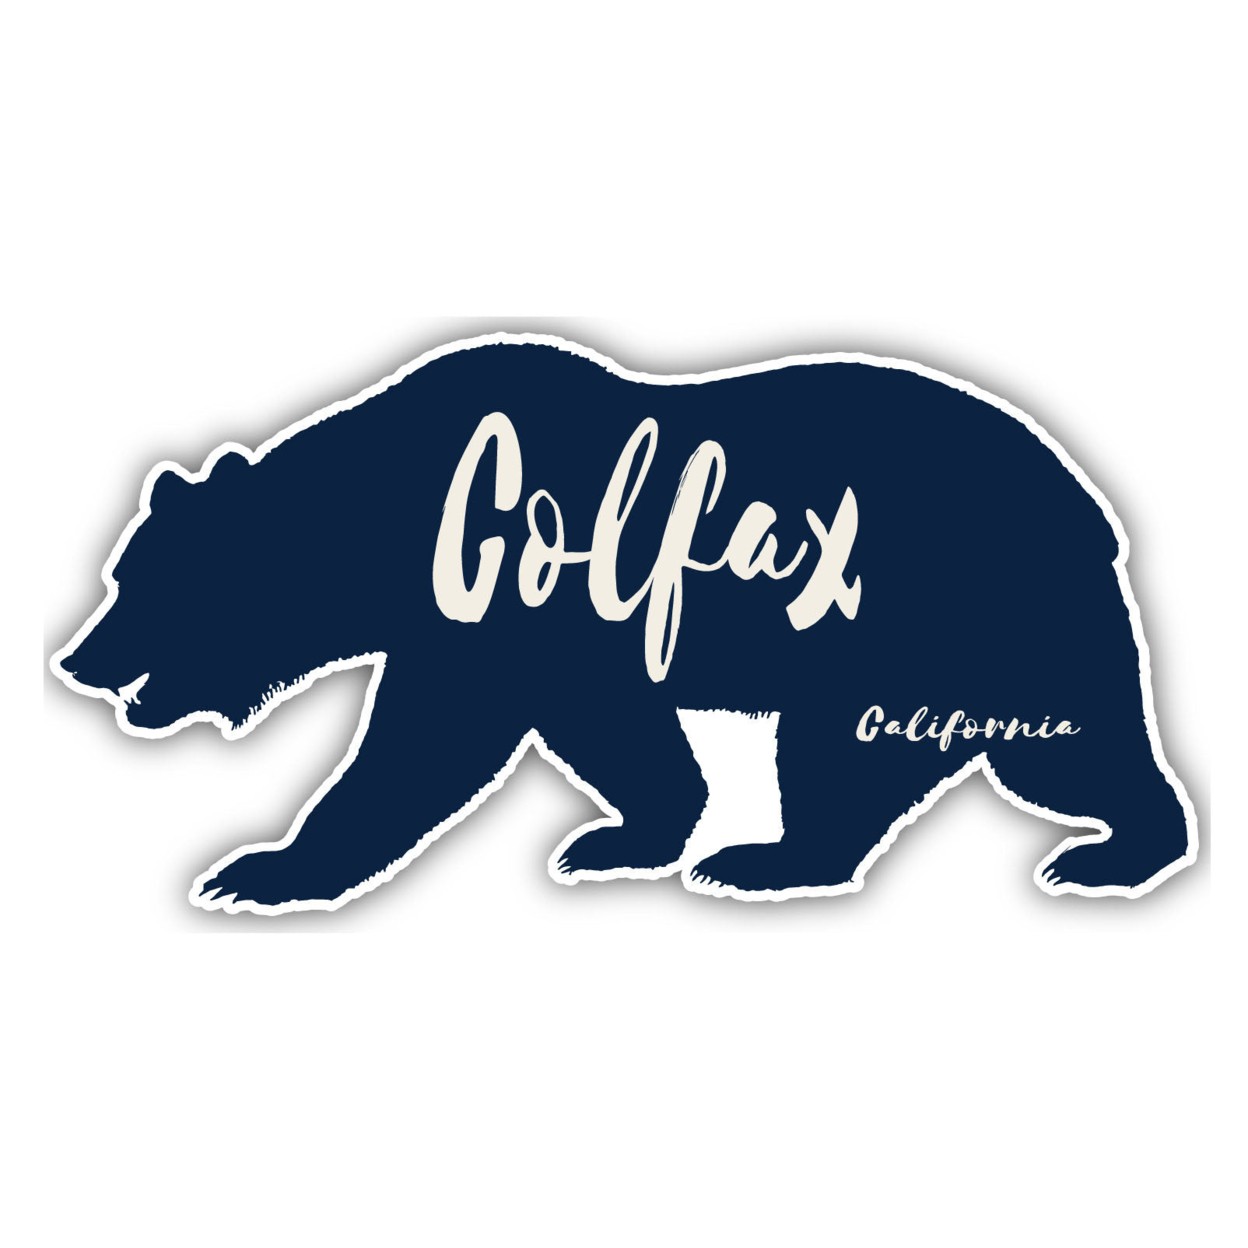 Colfax California Souvenir Decorative Stickers (Choose Theme And Size) - 4-Pack, 12-Inch, Bear